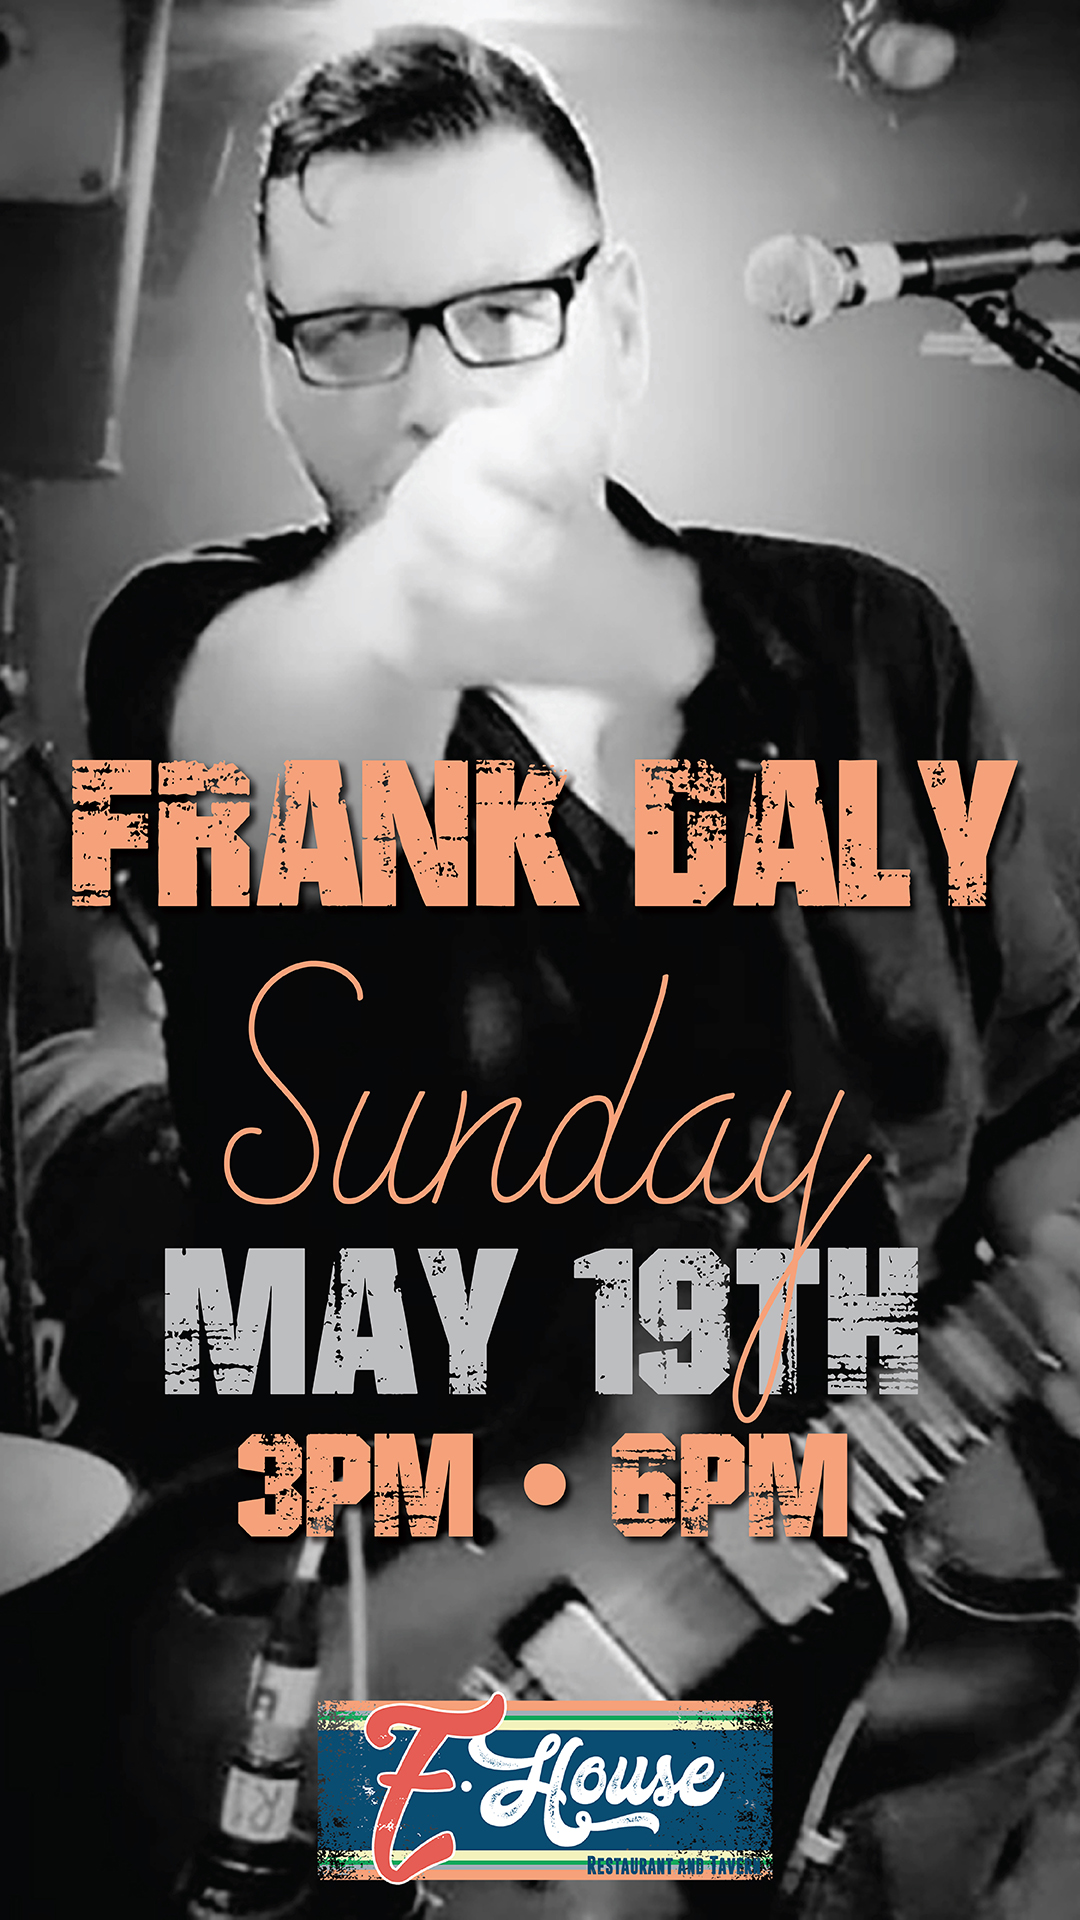 Promotional poster featuring a man pointing forward, advertising a live performance by frank daly at e-house on sunday, may 19th from 3-6 pm.